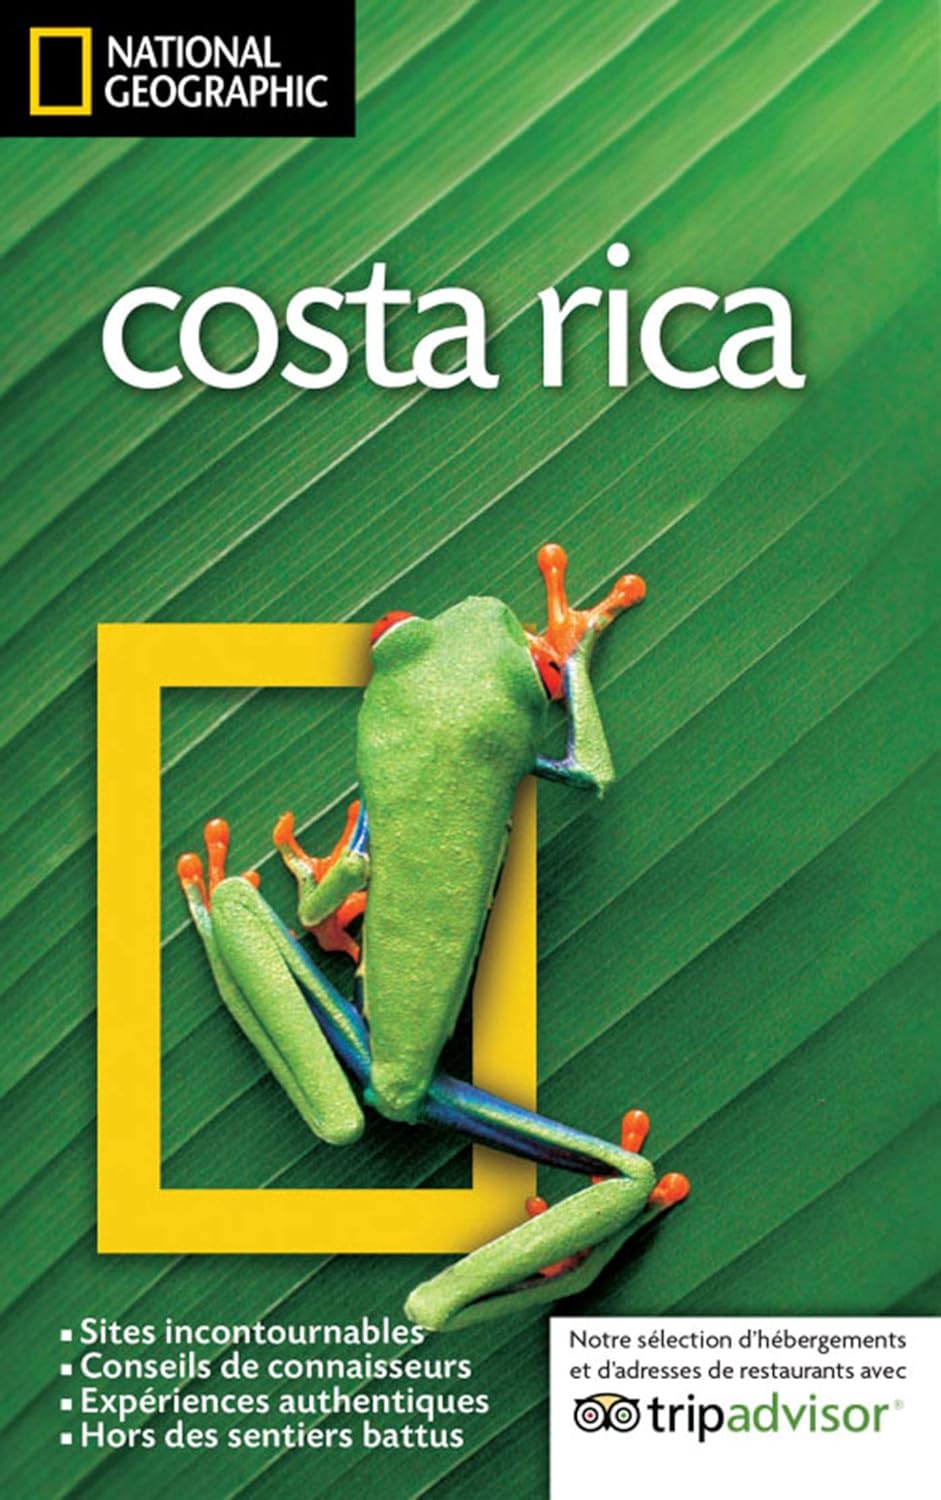 National Geographic : Costa rica - Christopher P. Baker